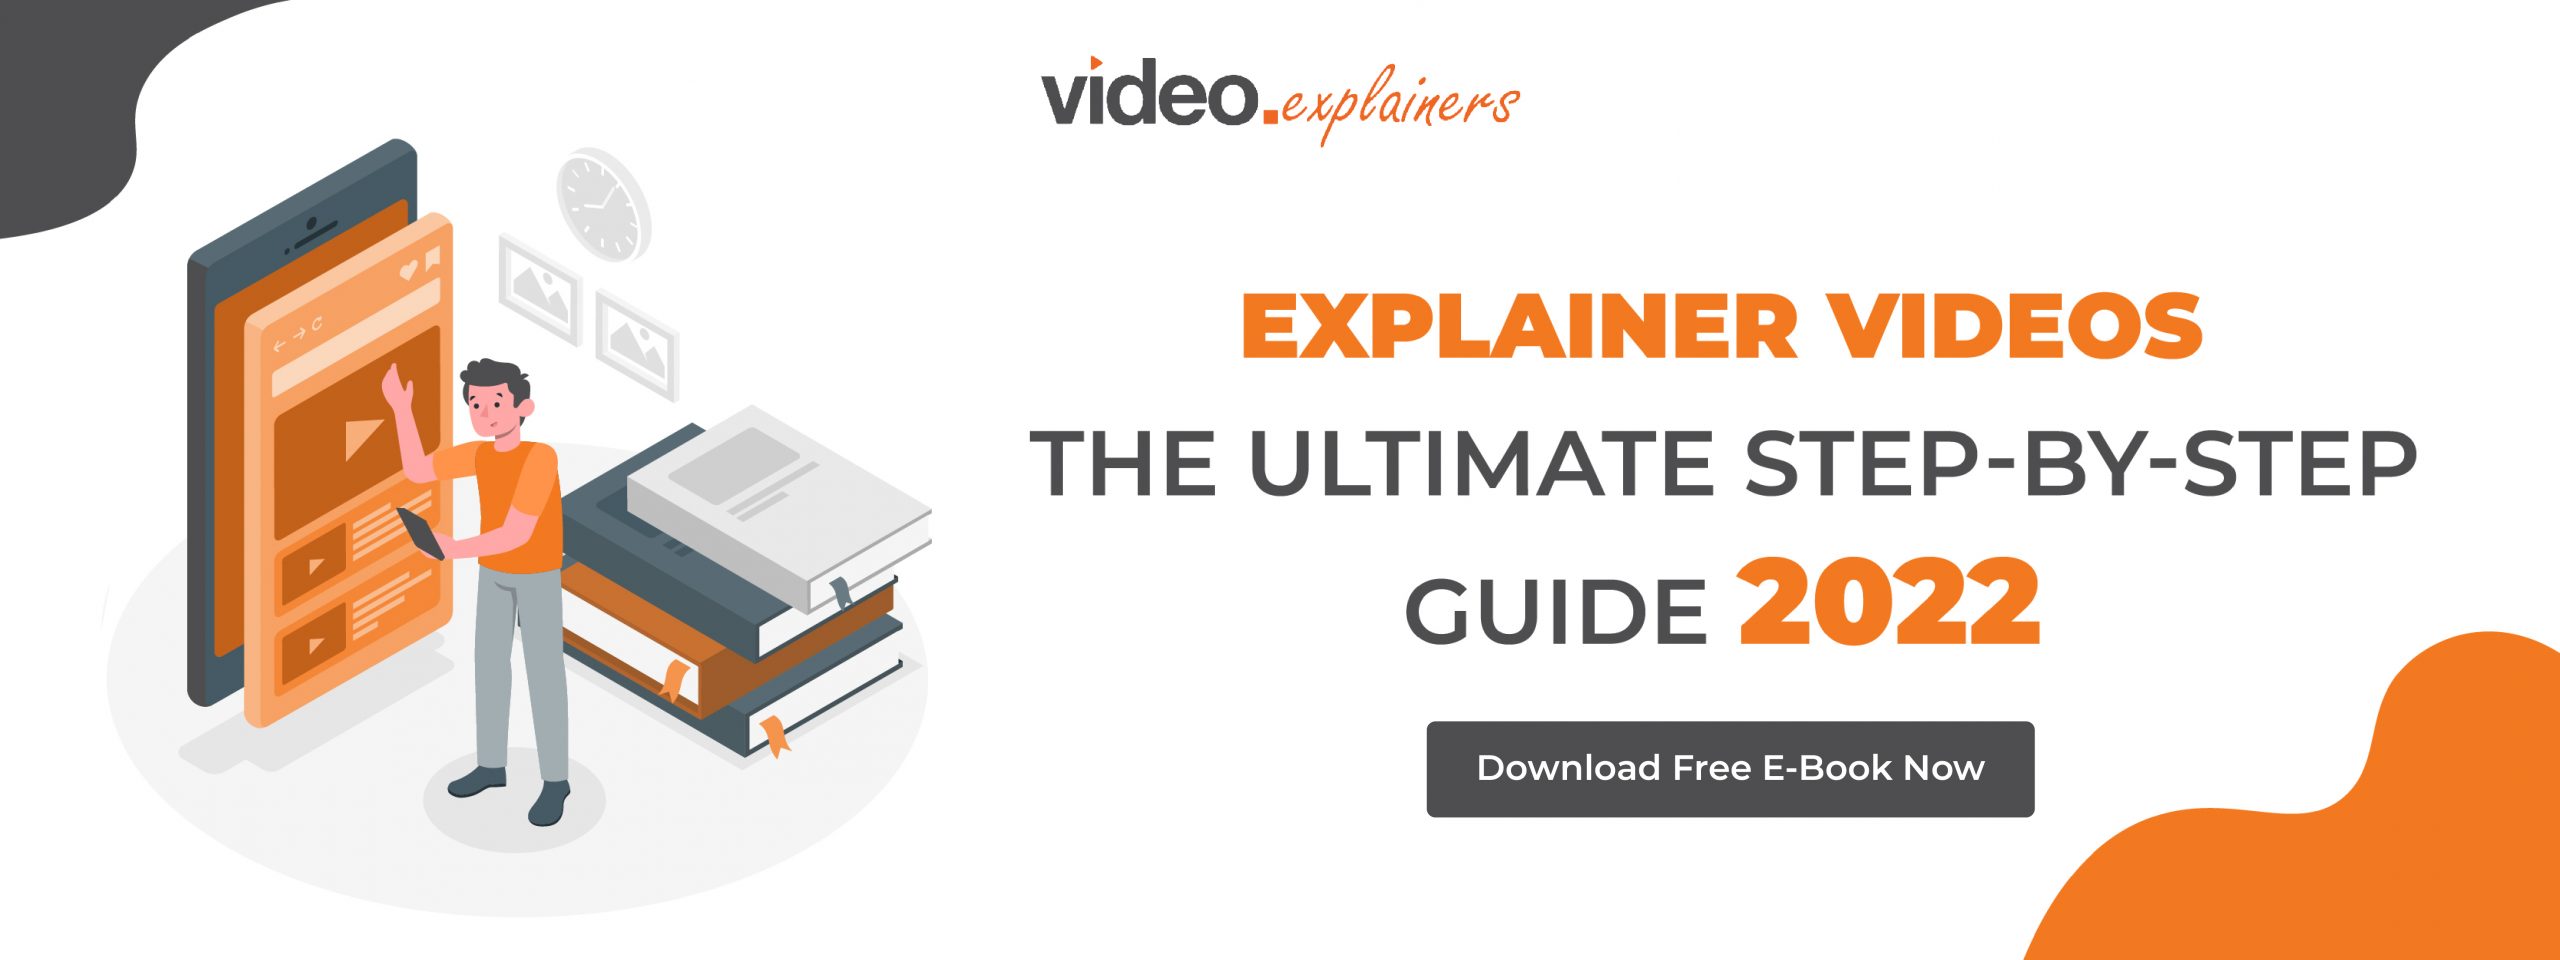 +29 7 Useful Tips To Write Your Animated Explainer Video Script 2022